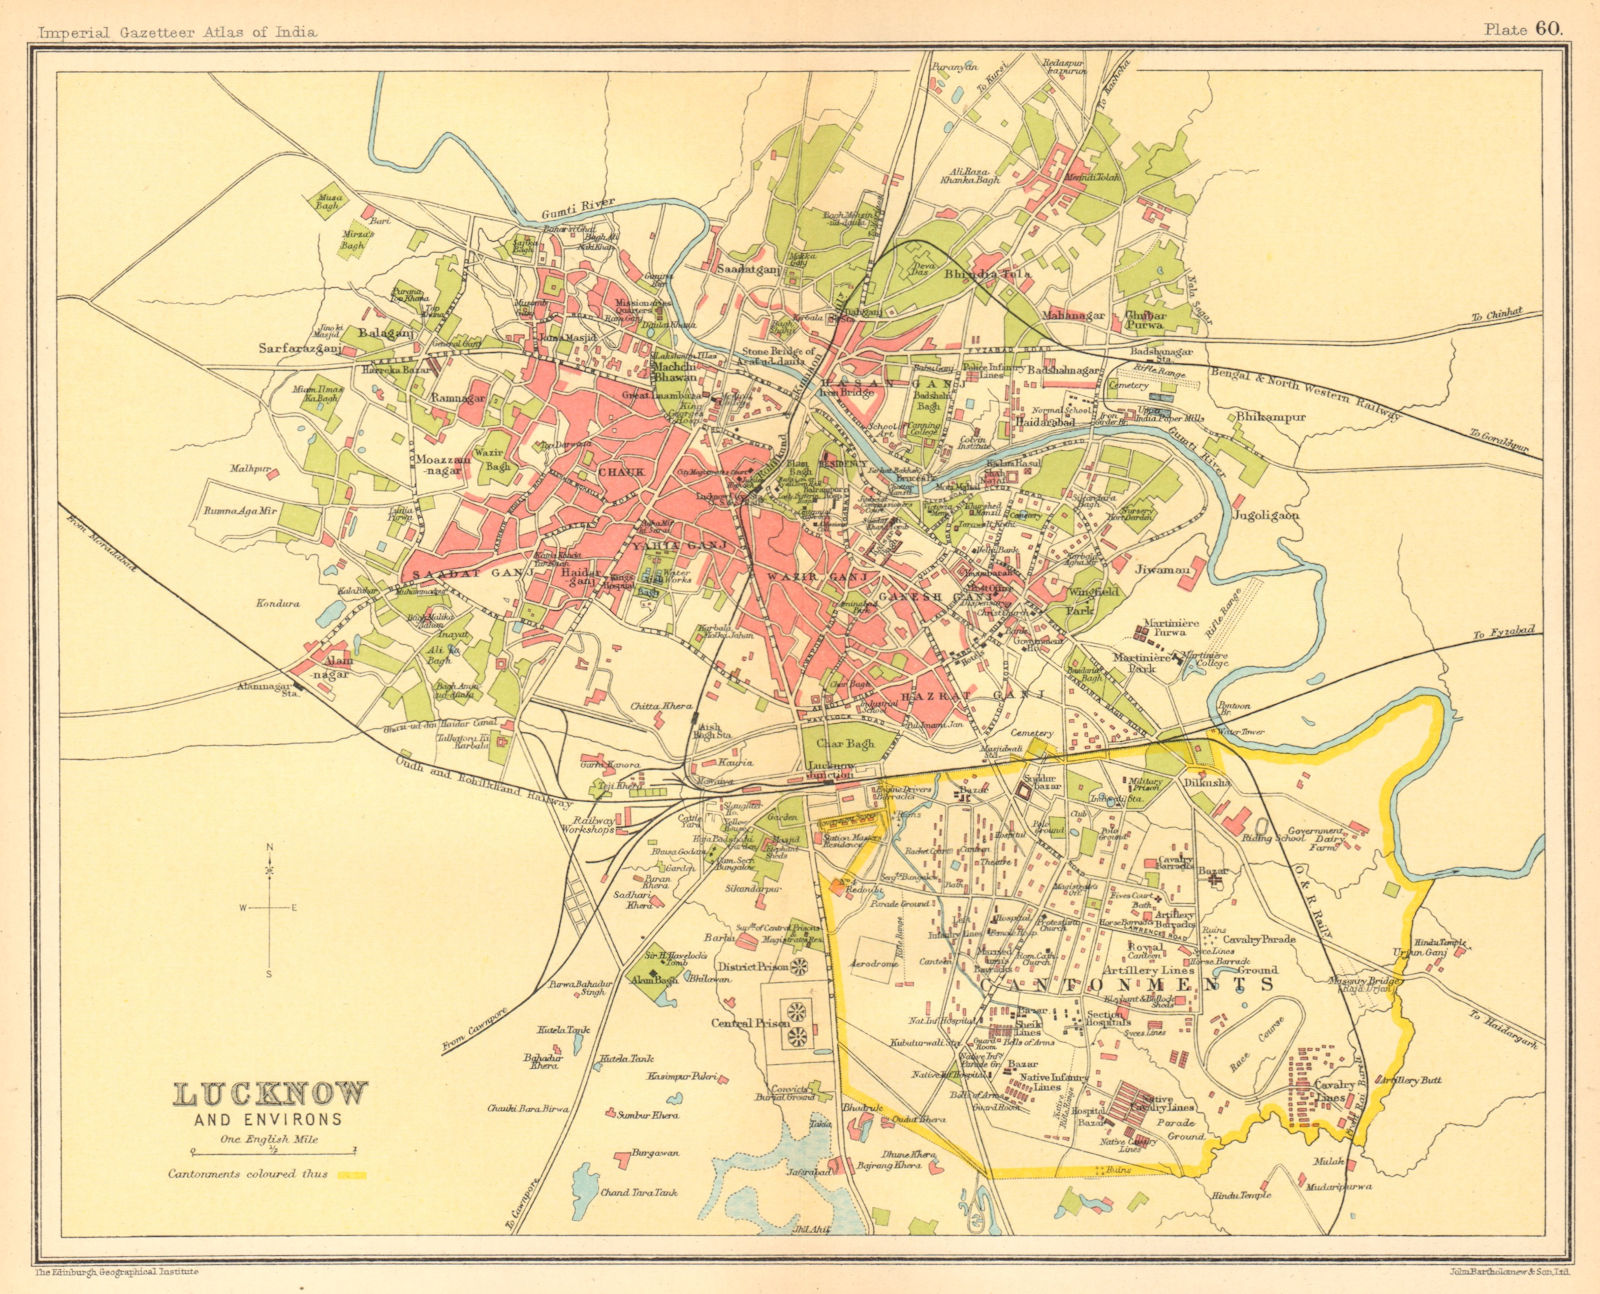 Lucknow town city plan. Cantonment & key buildings. British India 1931 old map